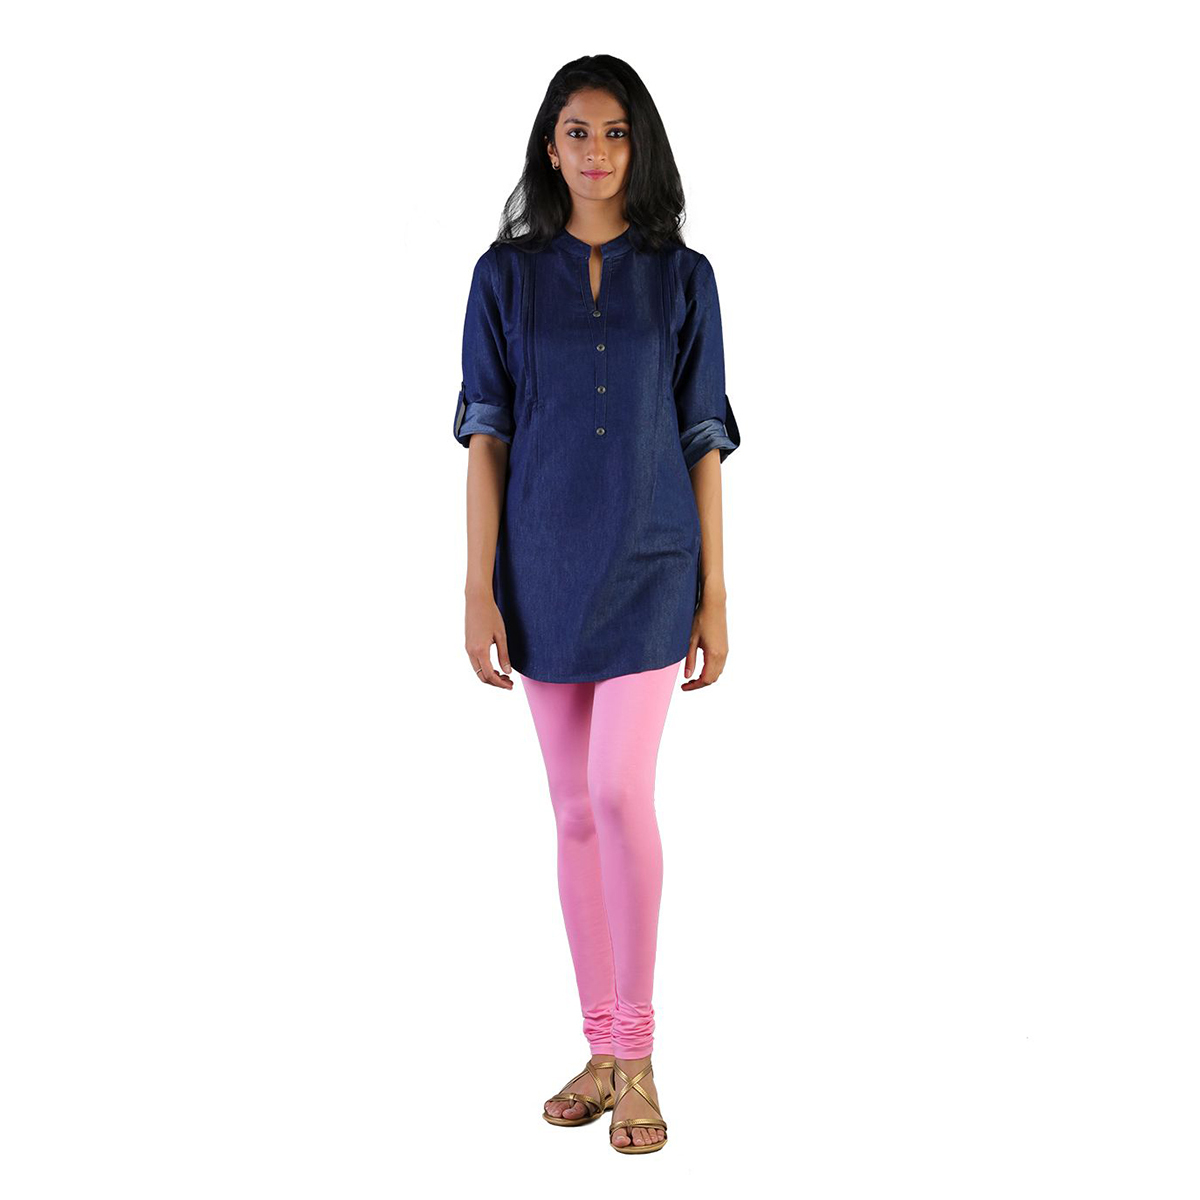 Twin Birds Women Solid Colour Churidar Legging with Signature Wide Waistband - Cotton Candy